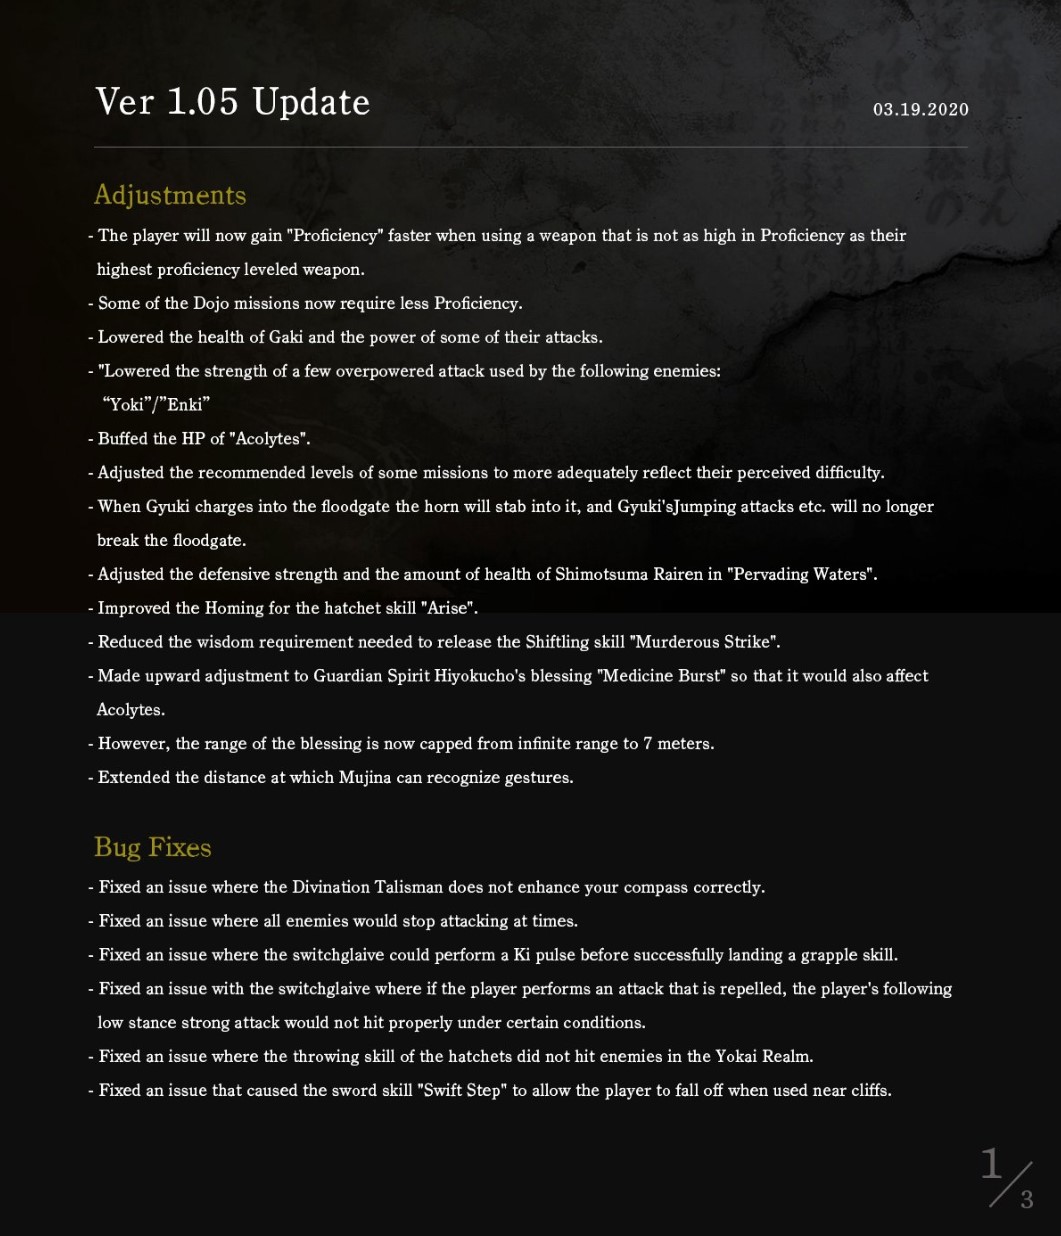 Nioh 2 1.05 Update Patch Notes